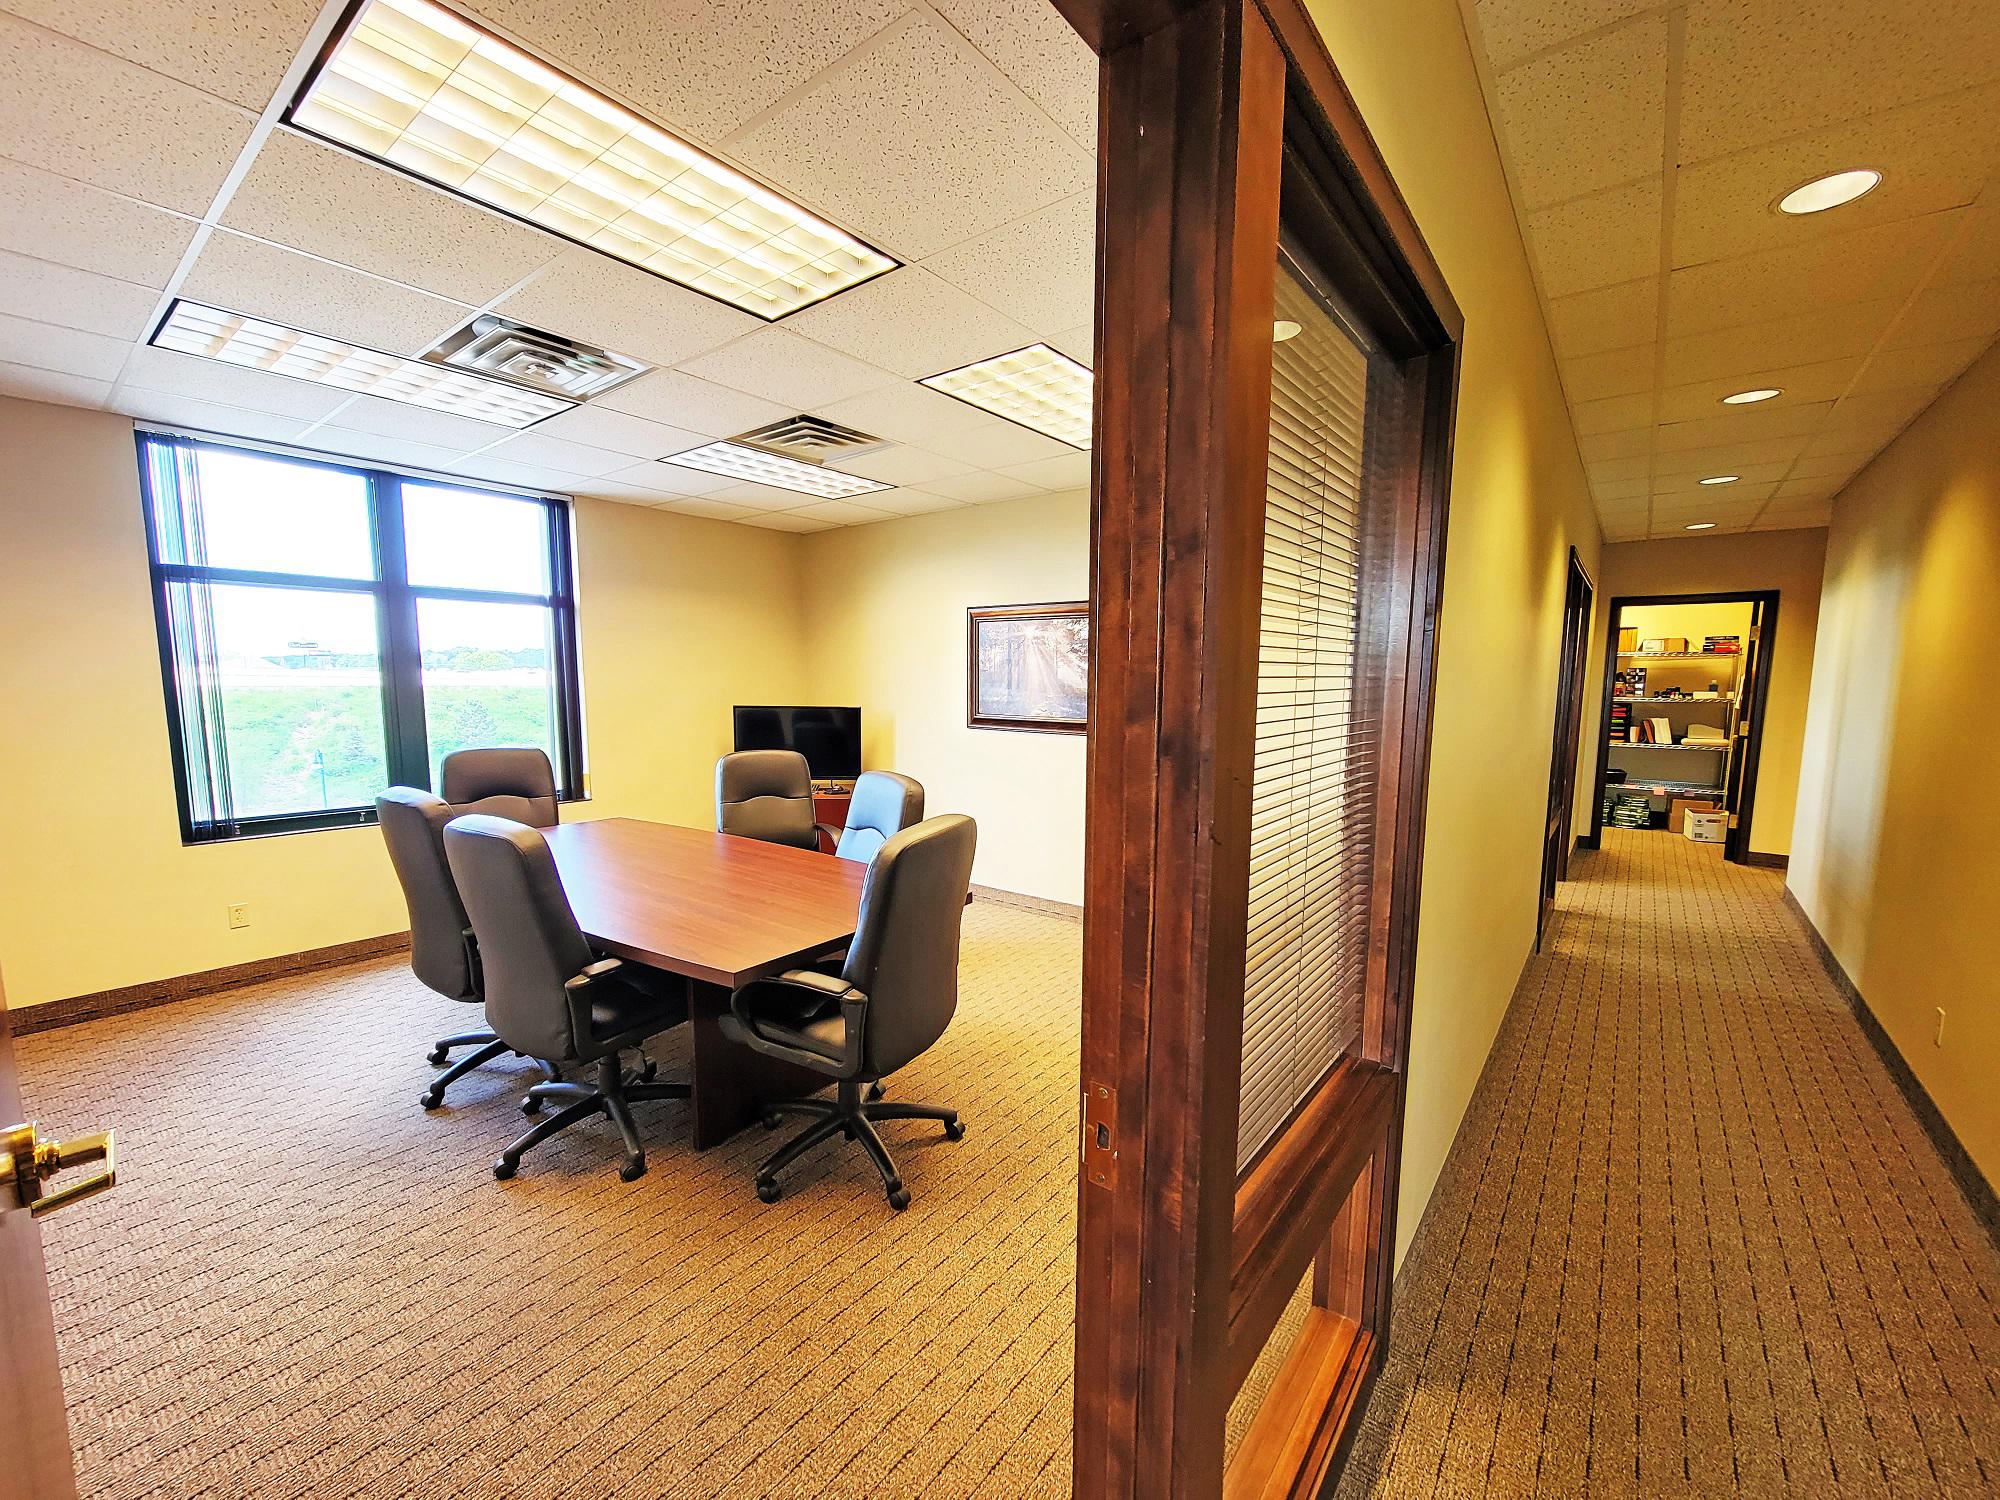 Conference room and hallway at our Wausau office